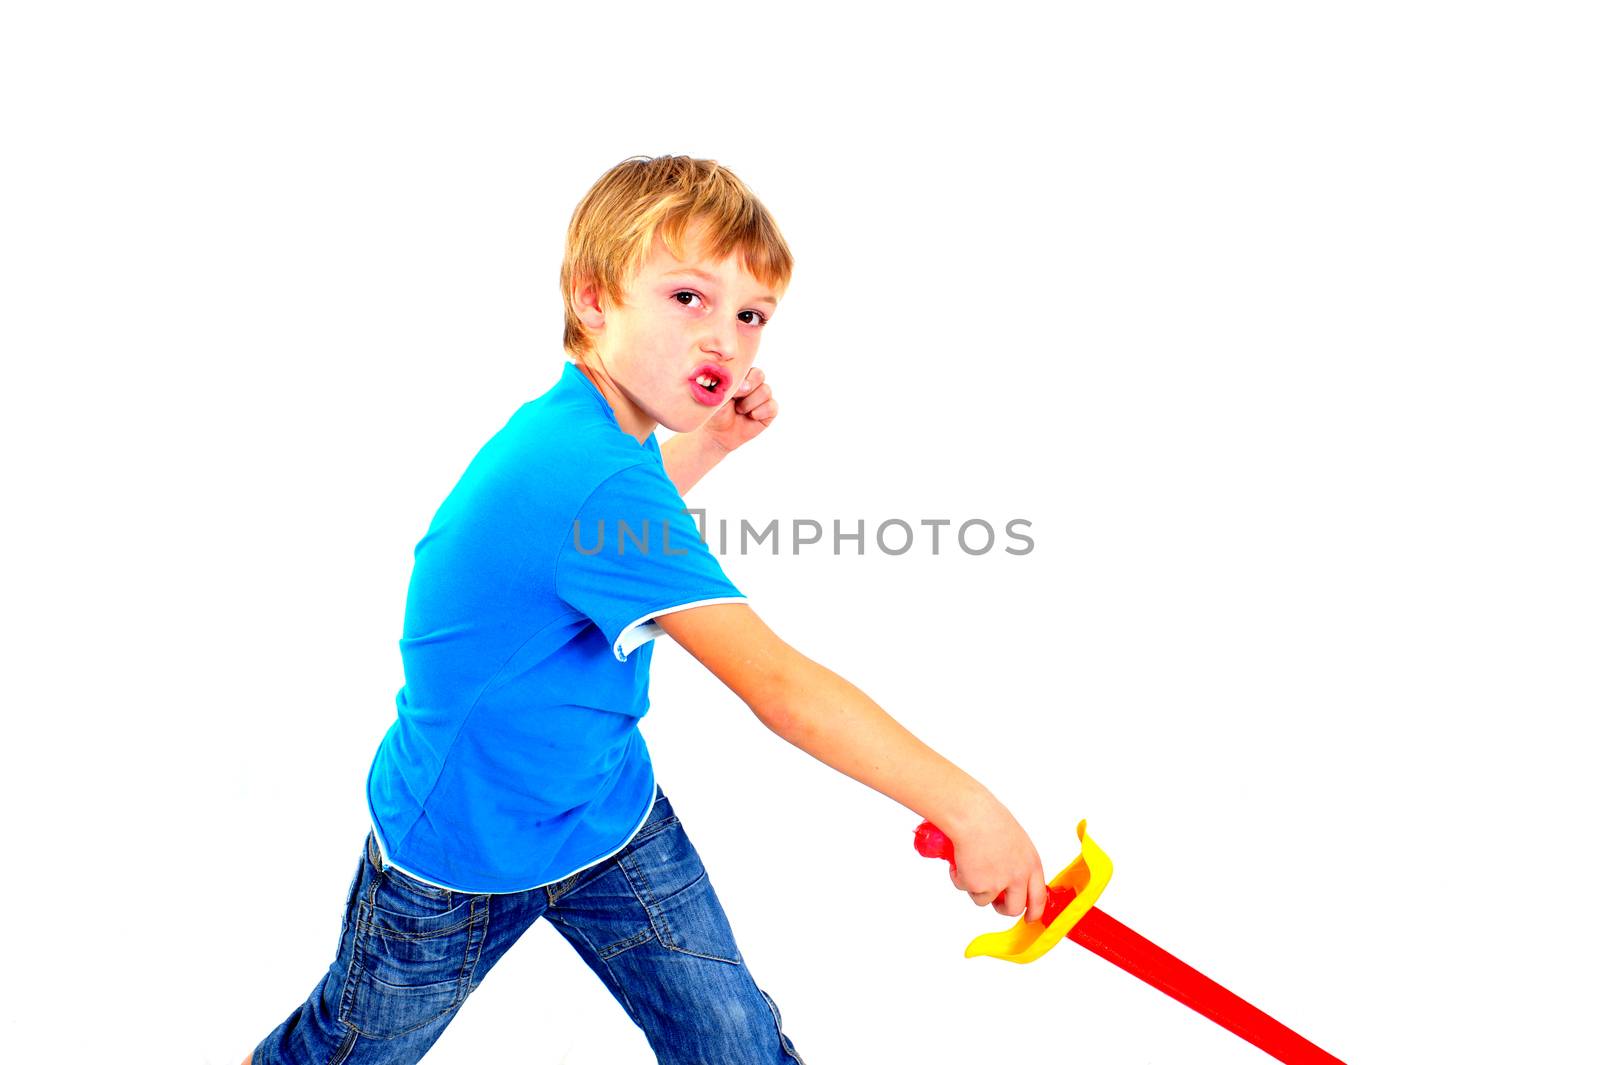 A young boy playing with sword on a white background